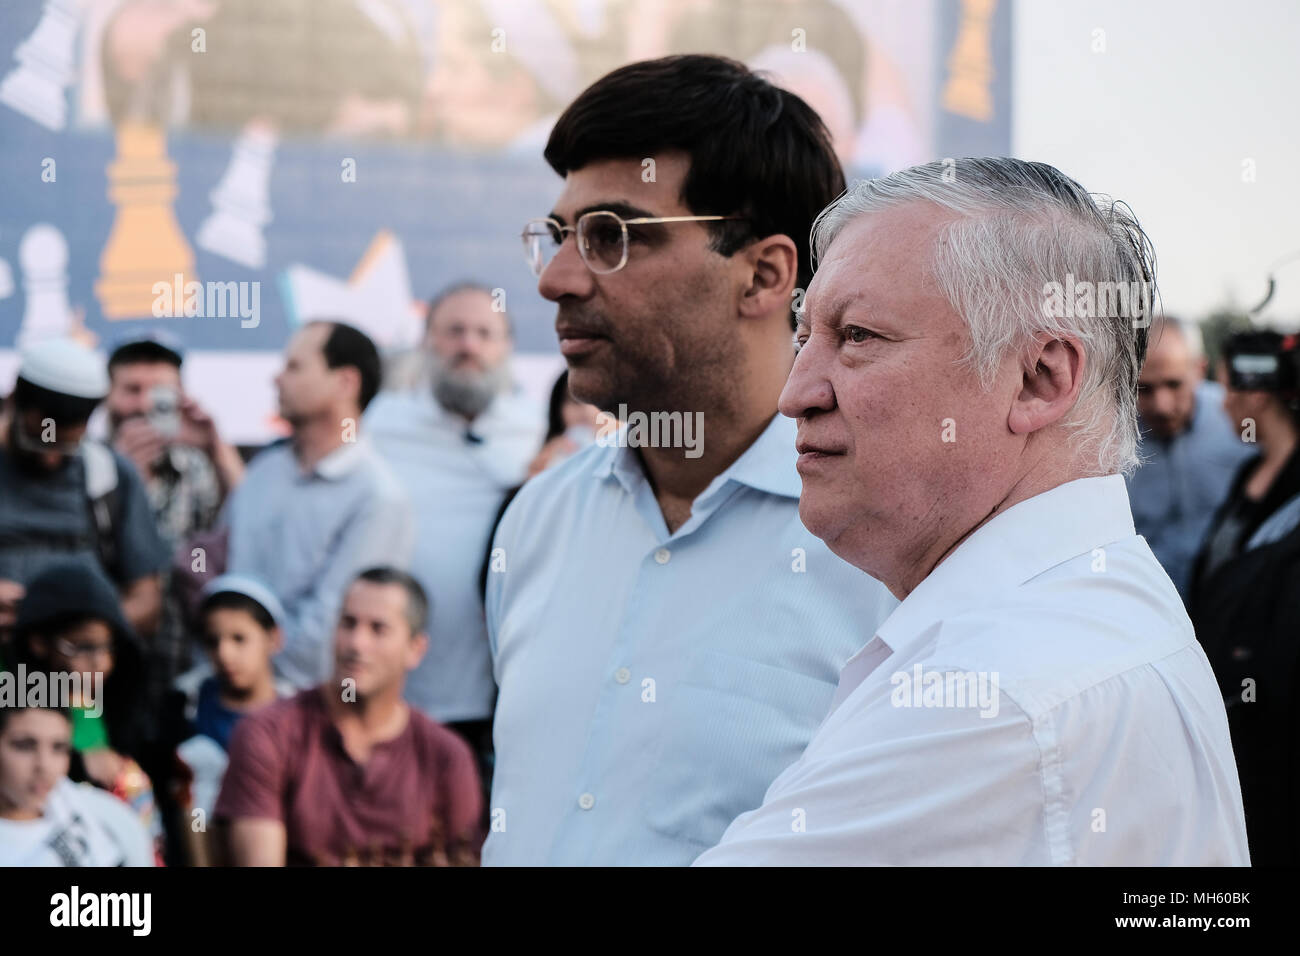 Jerusalem, Israel. 30th April, 2018. ANATOLY YEVGENYEVICH KARPOV (R), 66, Russian chess grandmaster and VISWANATHAN VISHY ANAND (2nd right), 49, Indian chess grandmaster, play chess against dozens of Israeli youth champions simultaneously at the Jaffa Gate in the framework of Israel's 70th Independence Day celebrations. Credit: Nir Alon/Alamy Live News Stock Photo